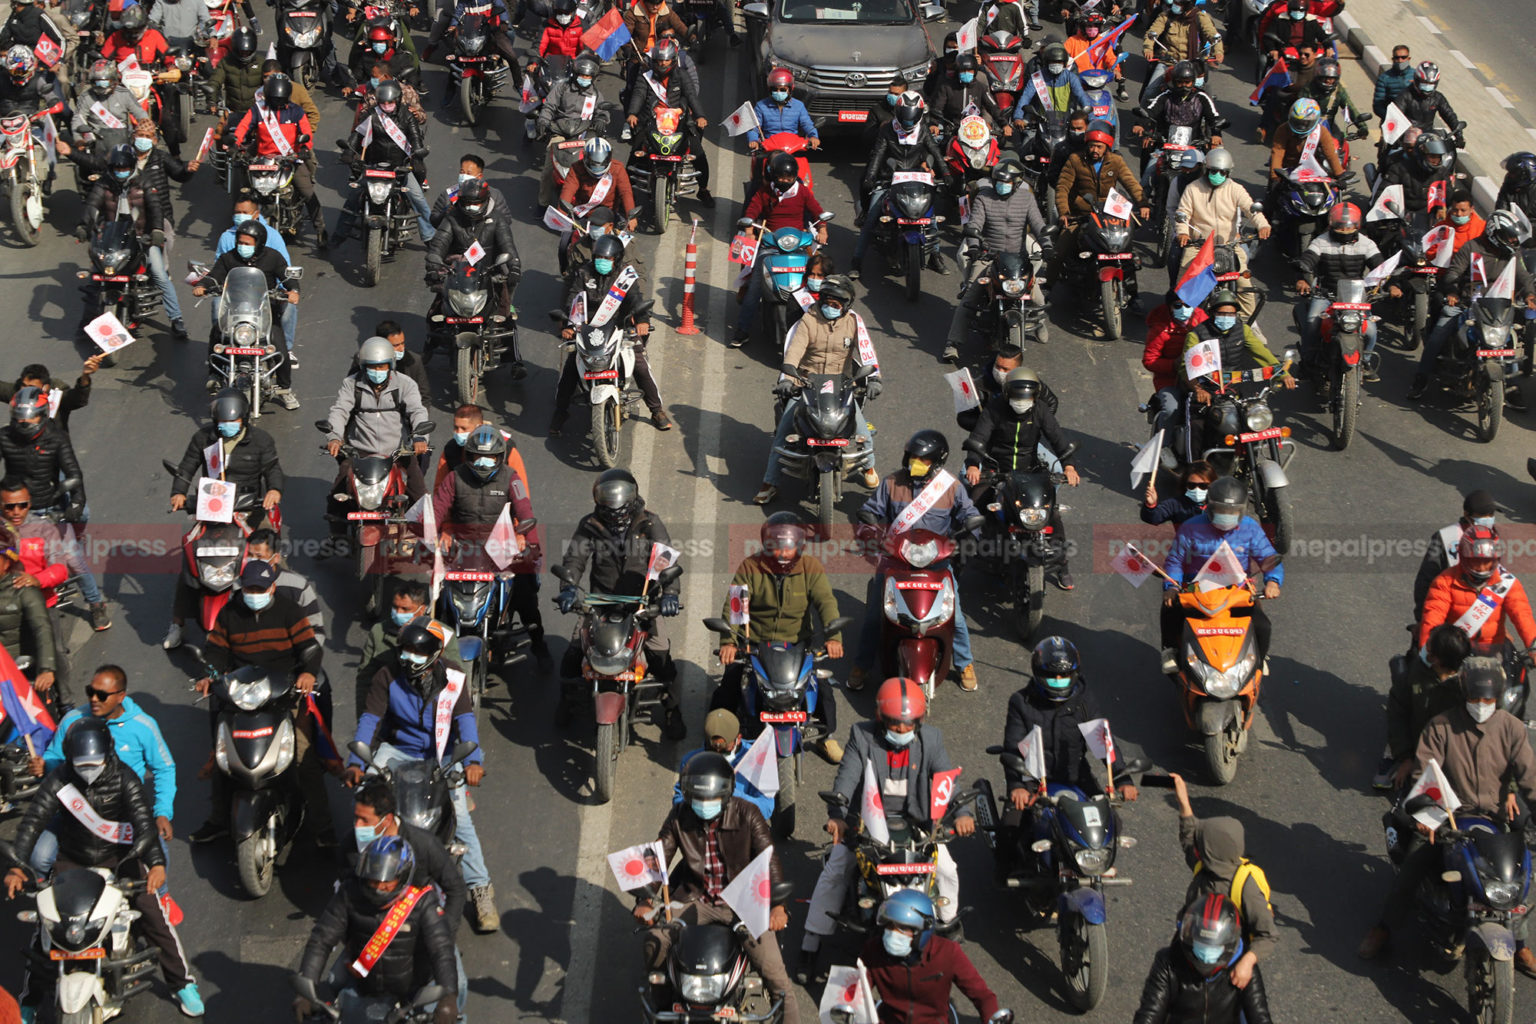 Motorcycle rally by Pro-Oli youth and students in Kathmandu